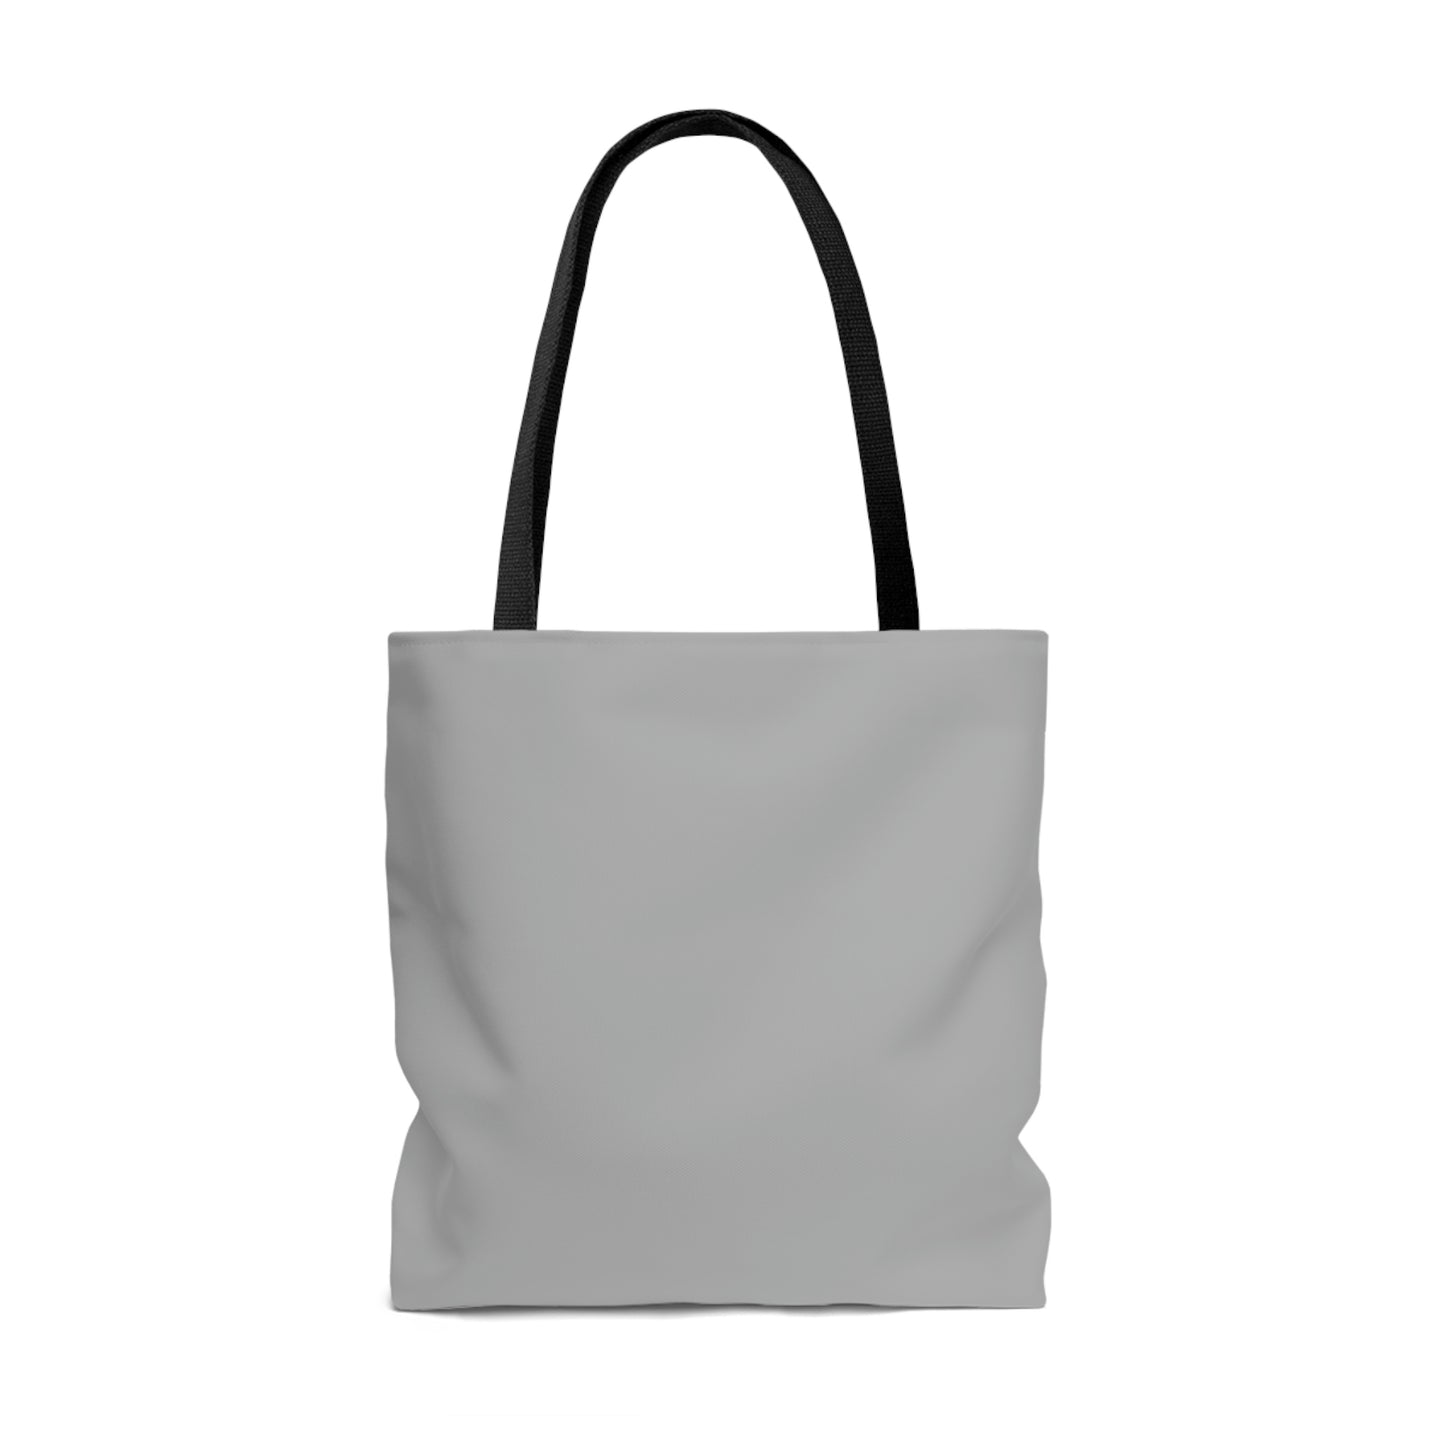 Moving In The Power Of God Who Set Me Free Tote Bag